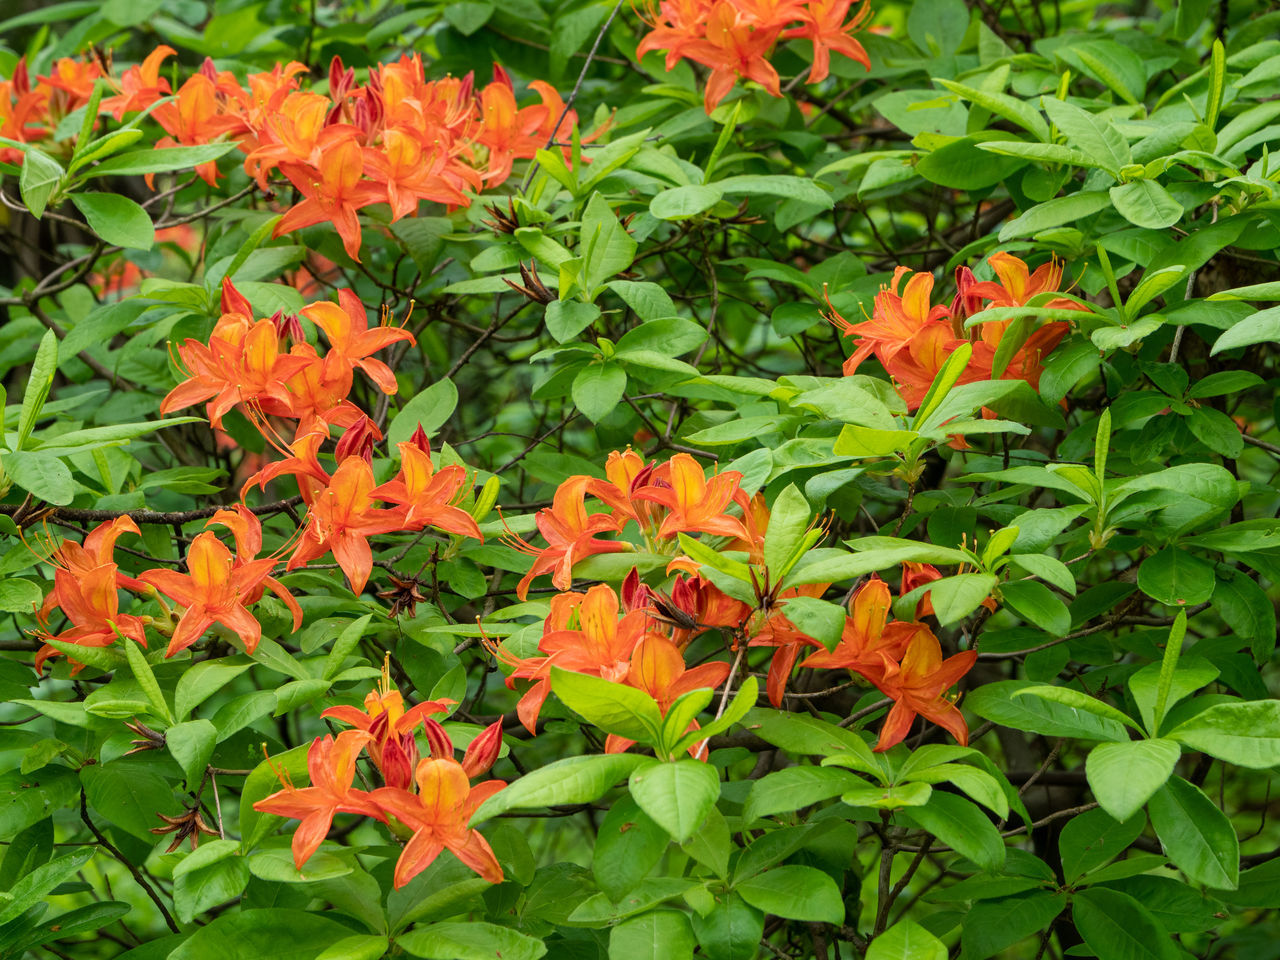 HIGH ANGLE VIEW OF ORANGE FLOWERING PLANTS ON PLANT